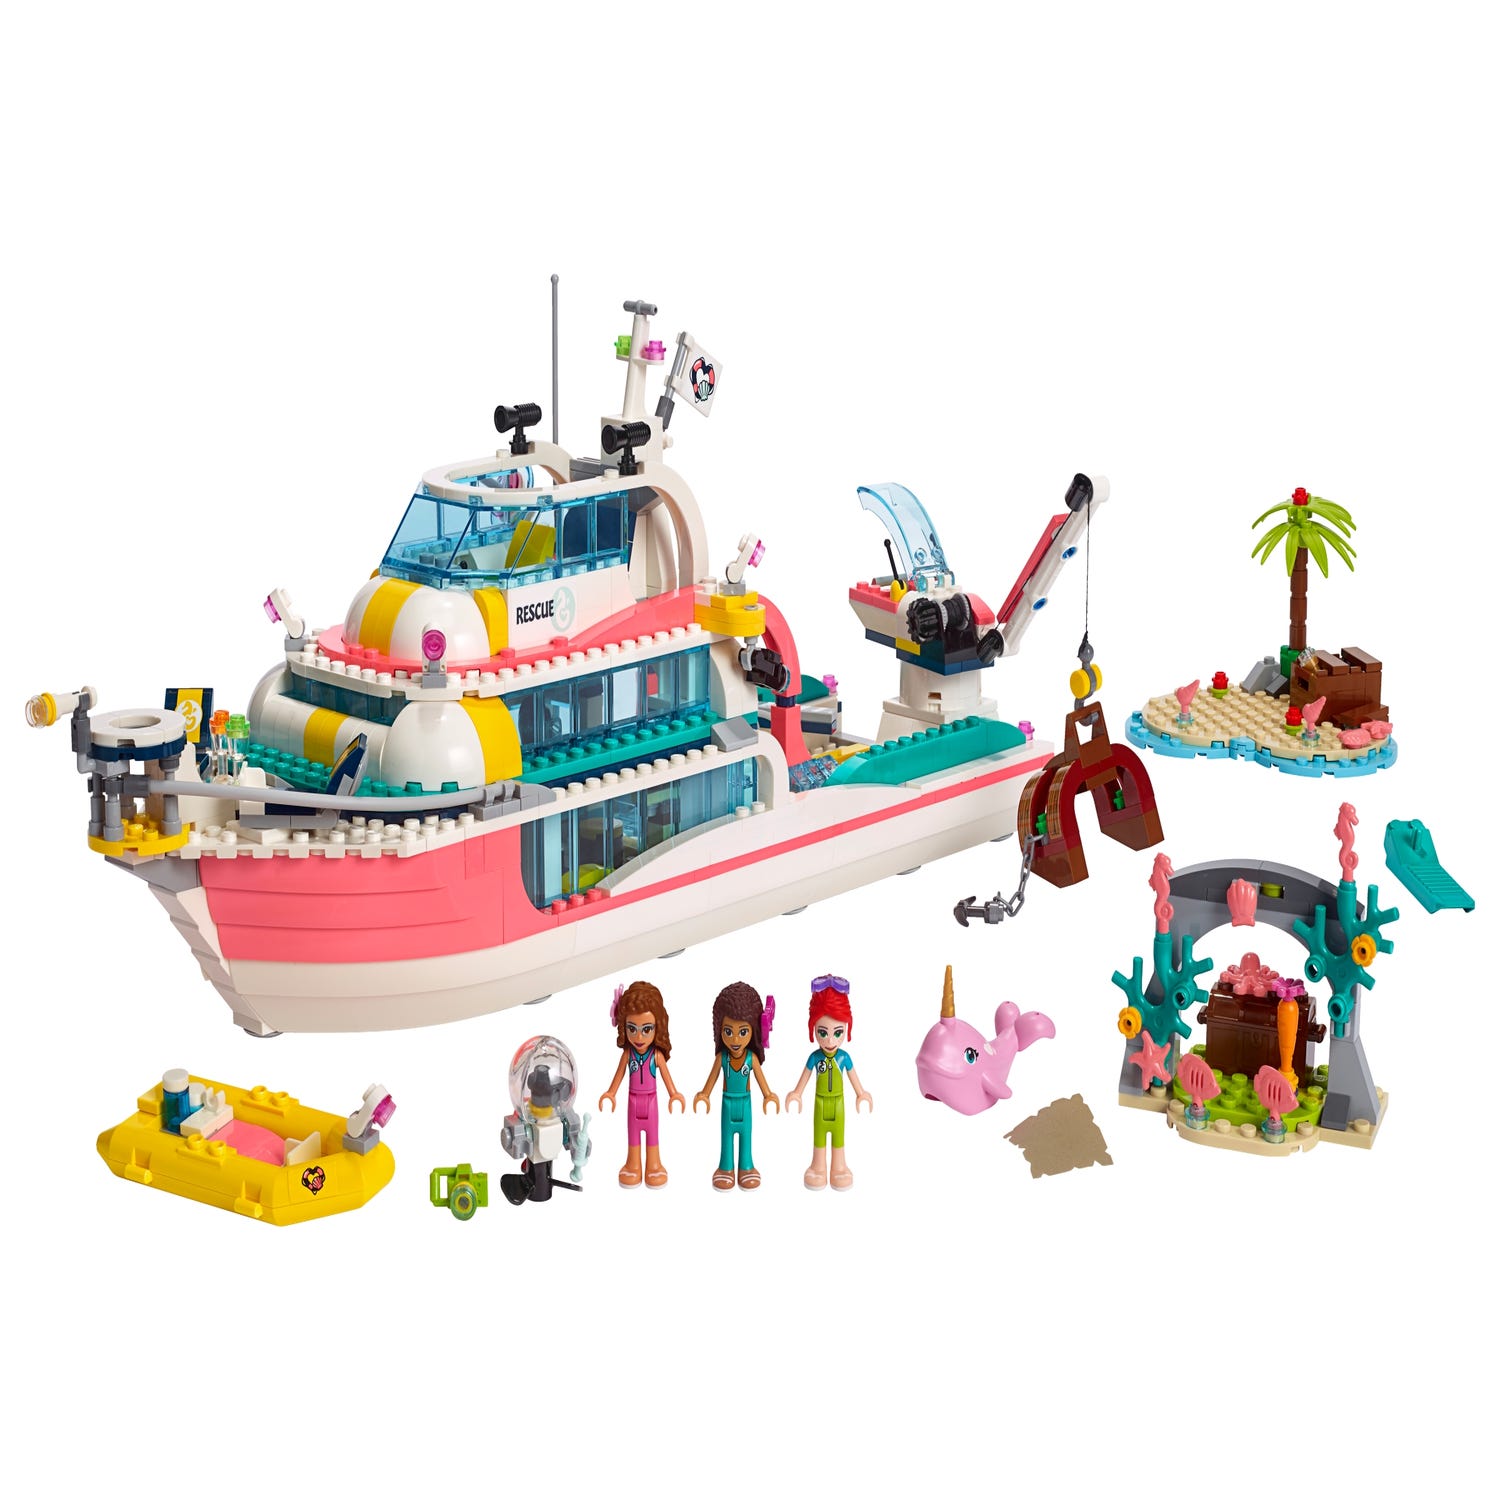 Rescue Mission Boat 41381 | Friends Buy online at the Official LEGO® Shop US